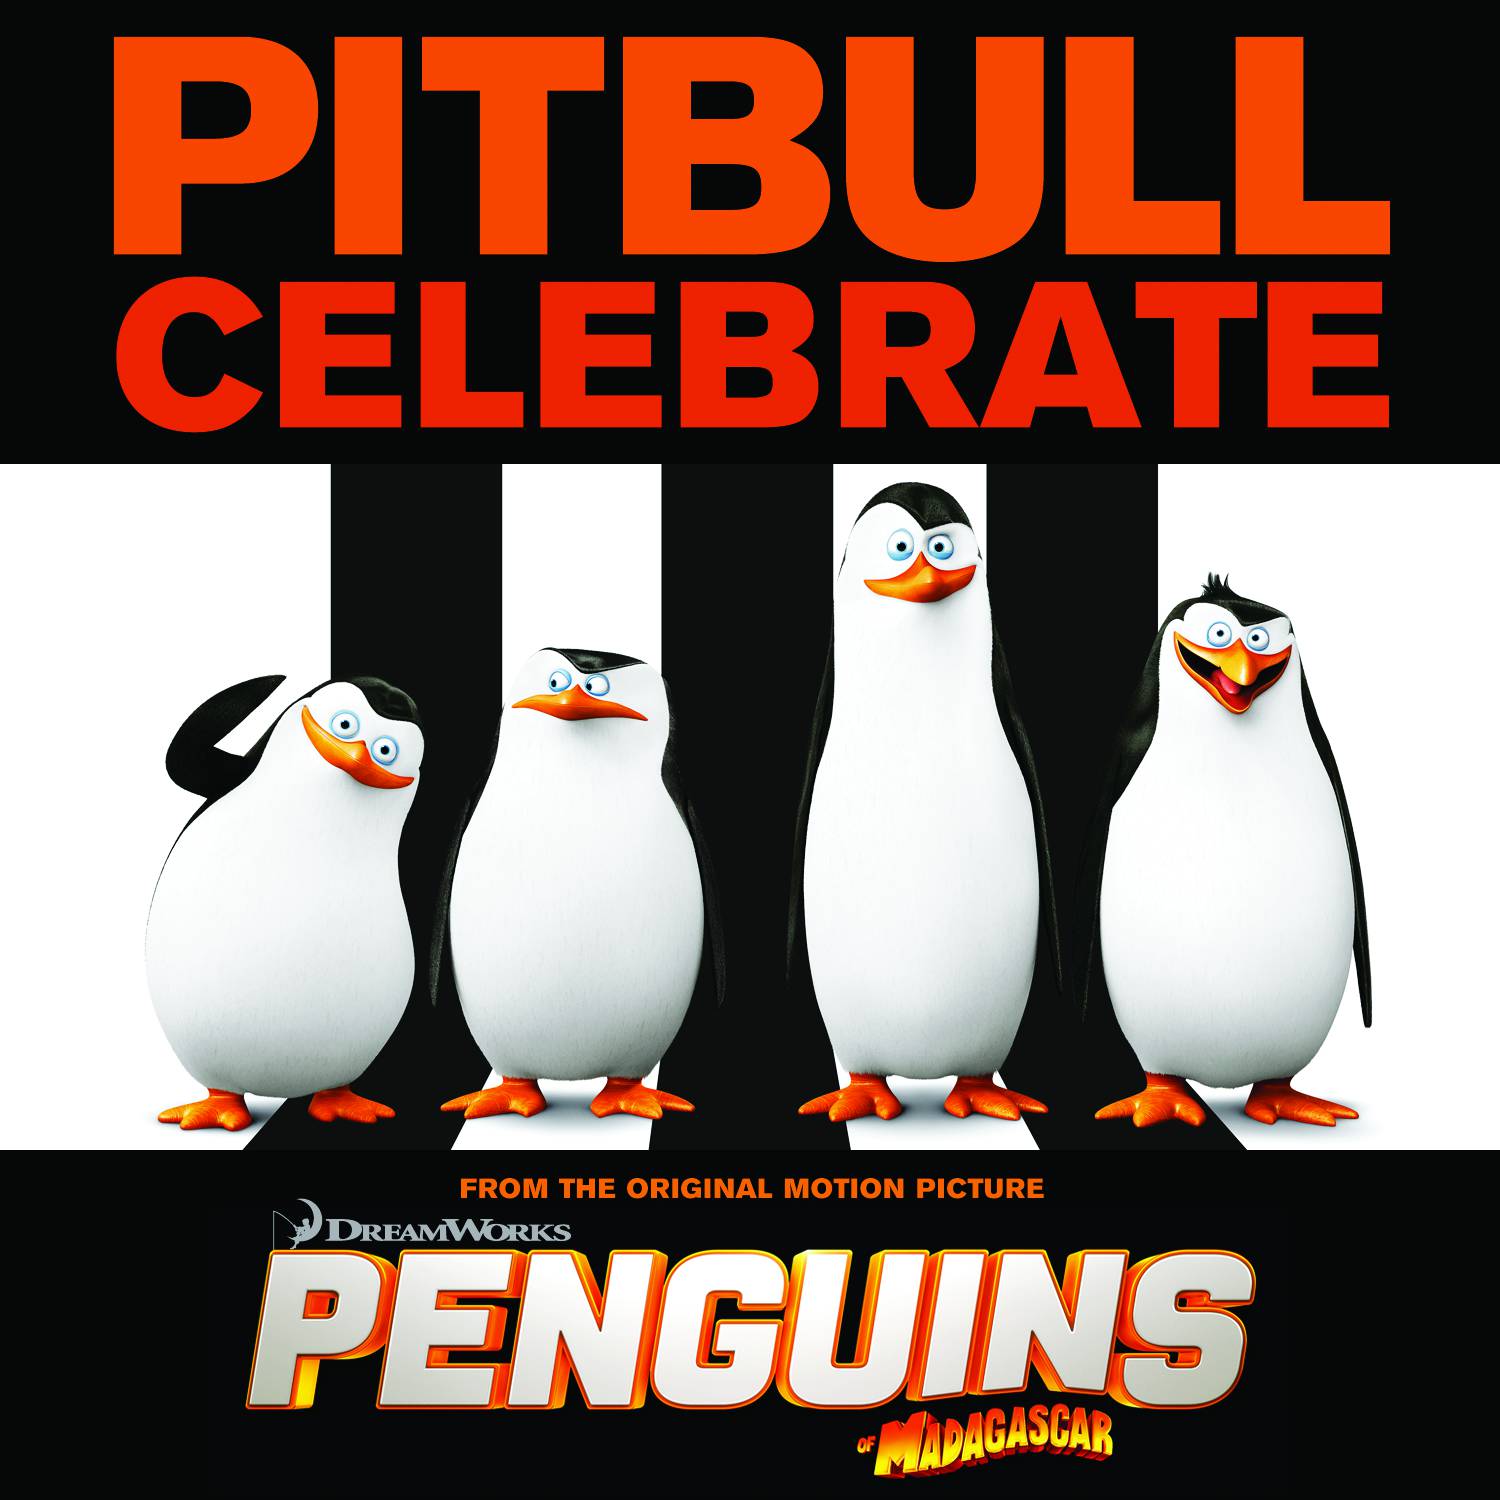 Celebrate (From the Original Motion Picture Penguins of "Madagascar")